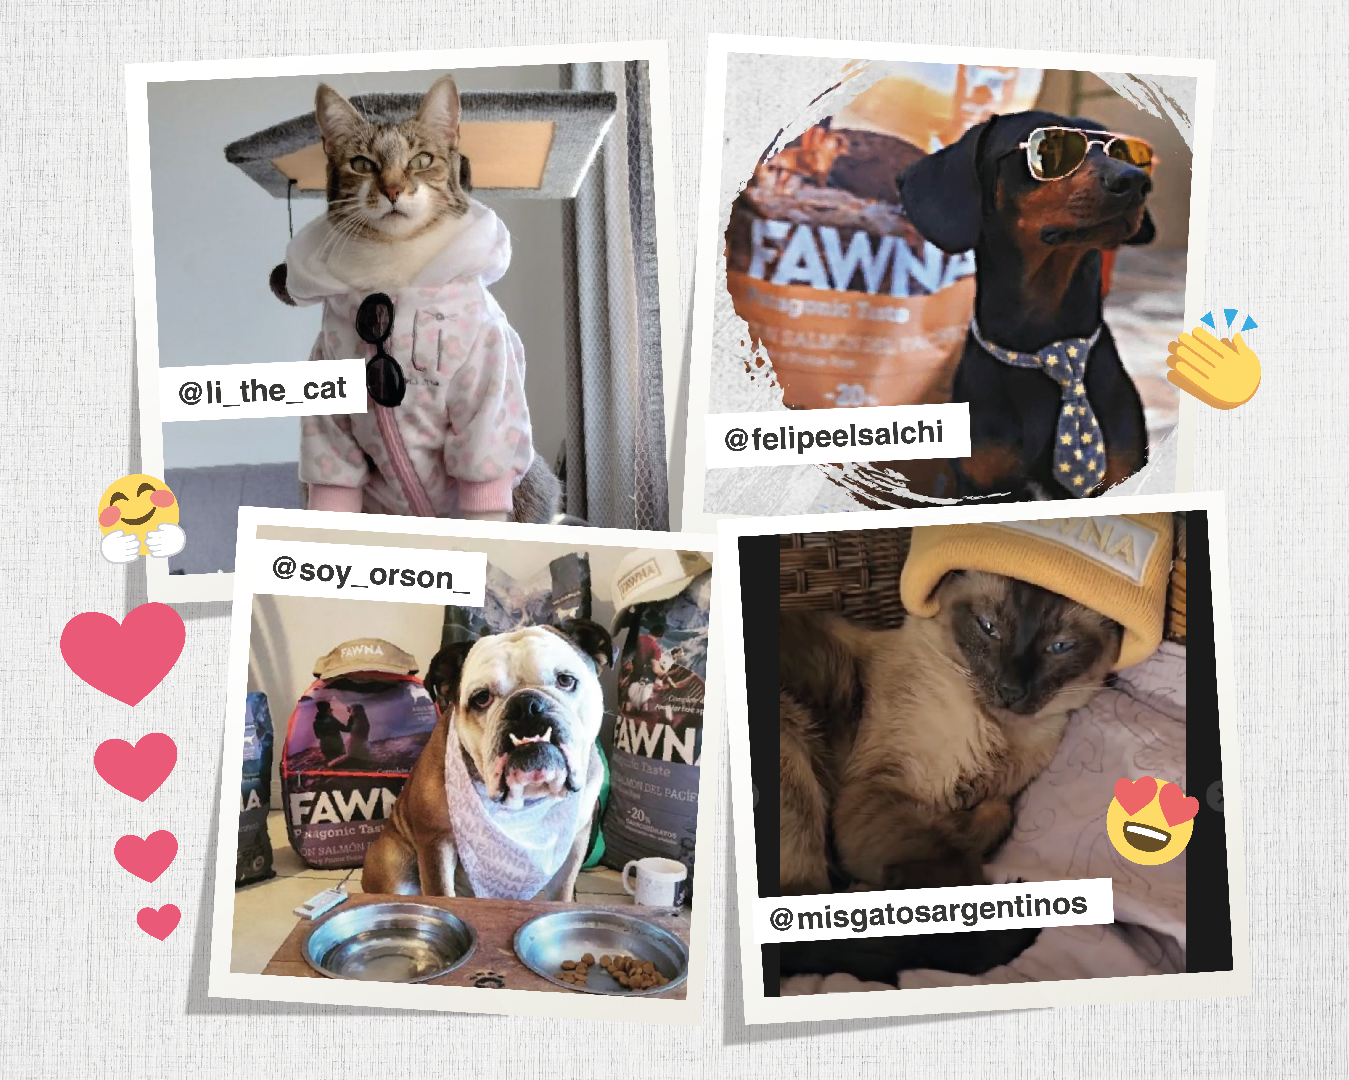 Find out how Fawna and hers InfluFawna promote excellent nutrition for our loyal friends